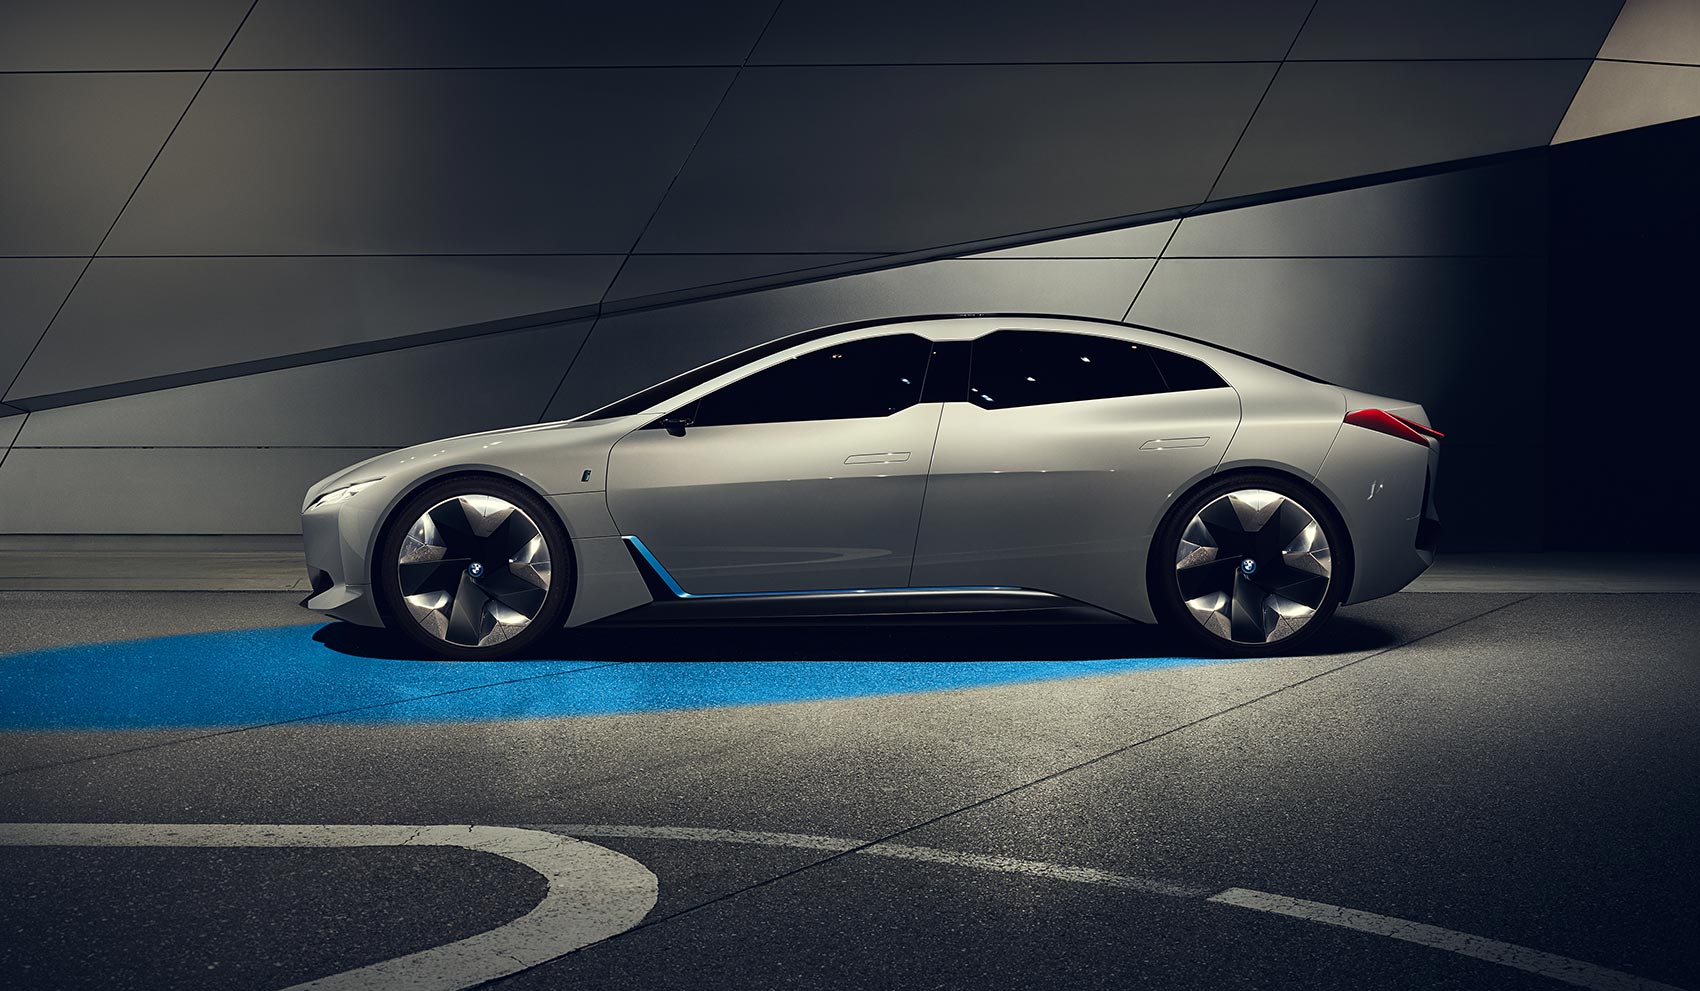 BMW to release first electric performance car in 2021